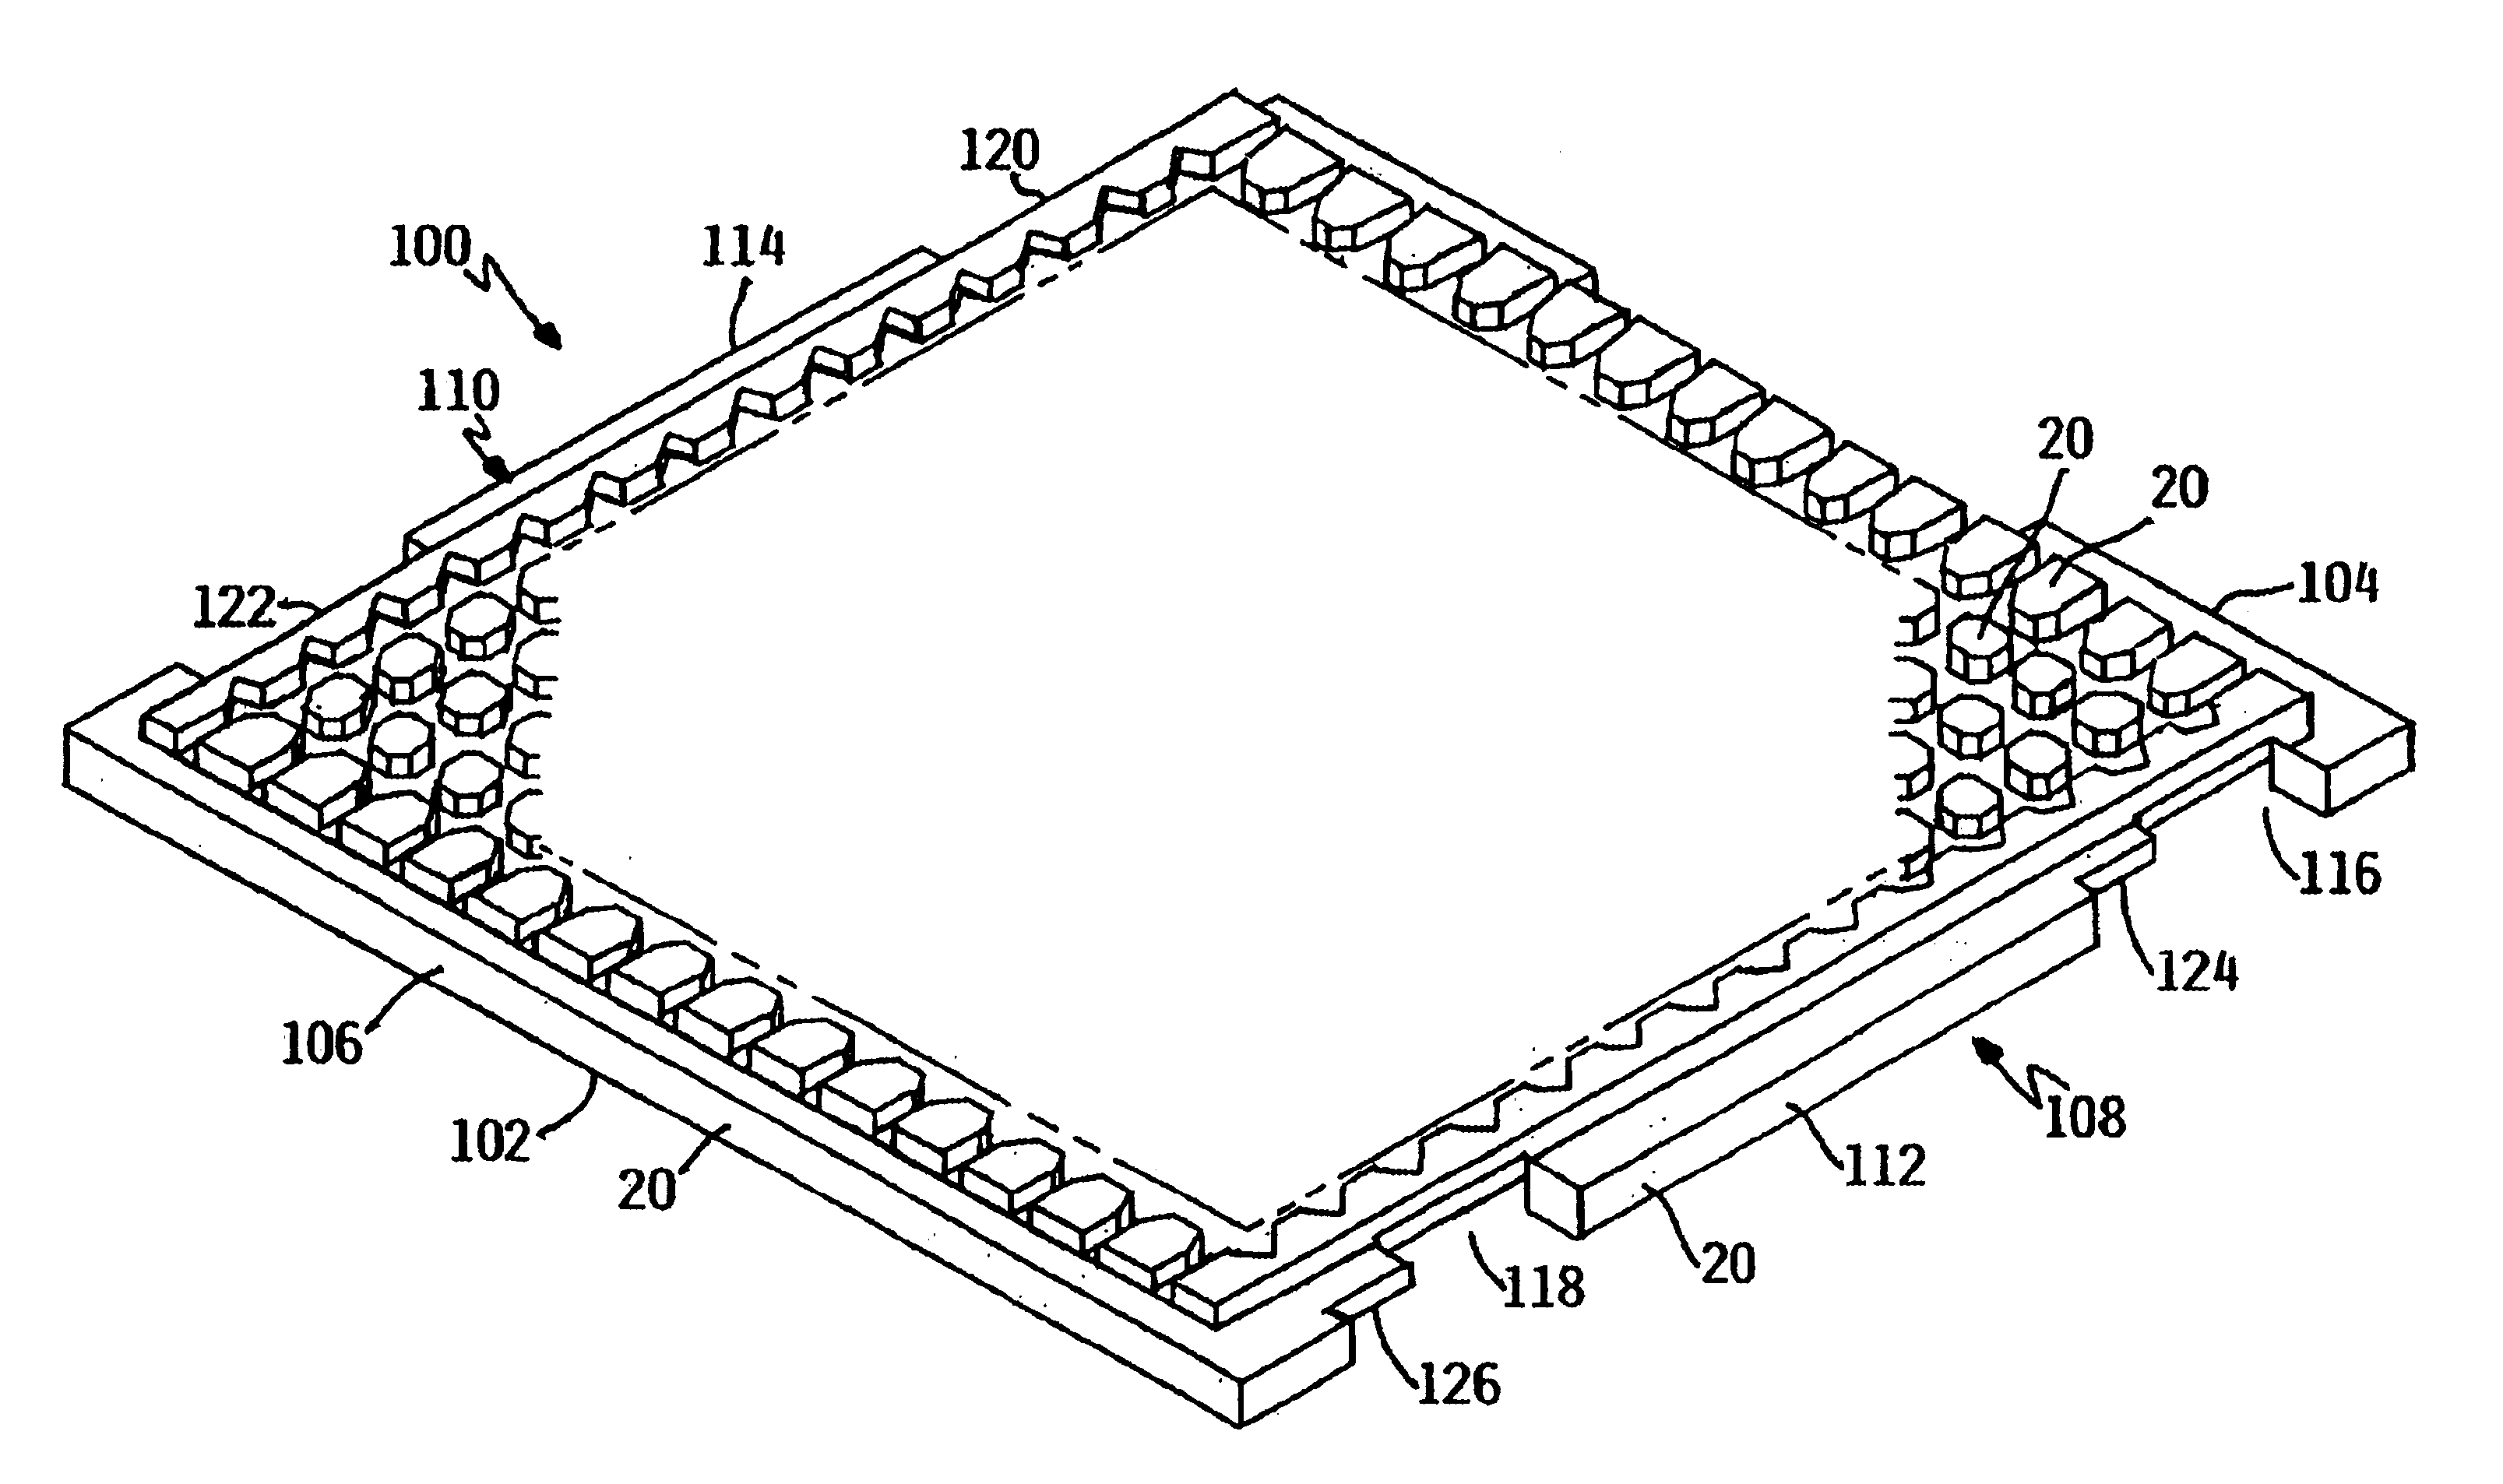 Tray carrier with ultraphobic surfaces